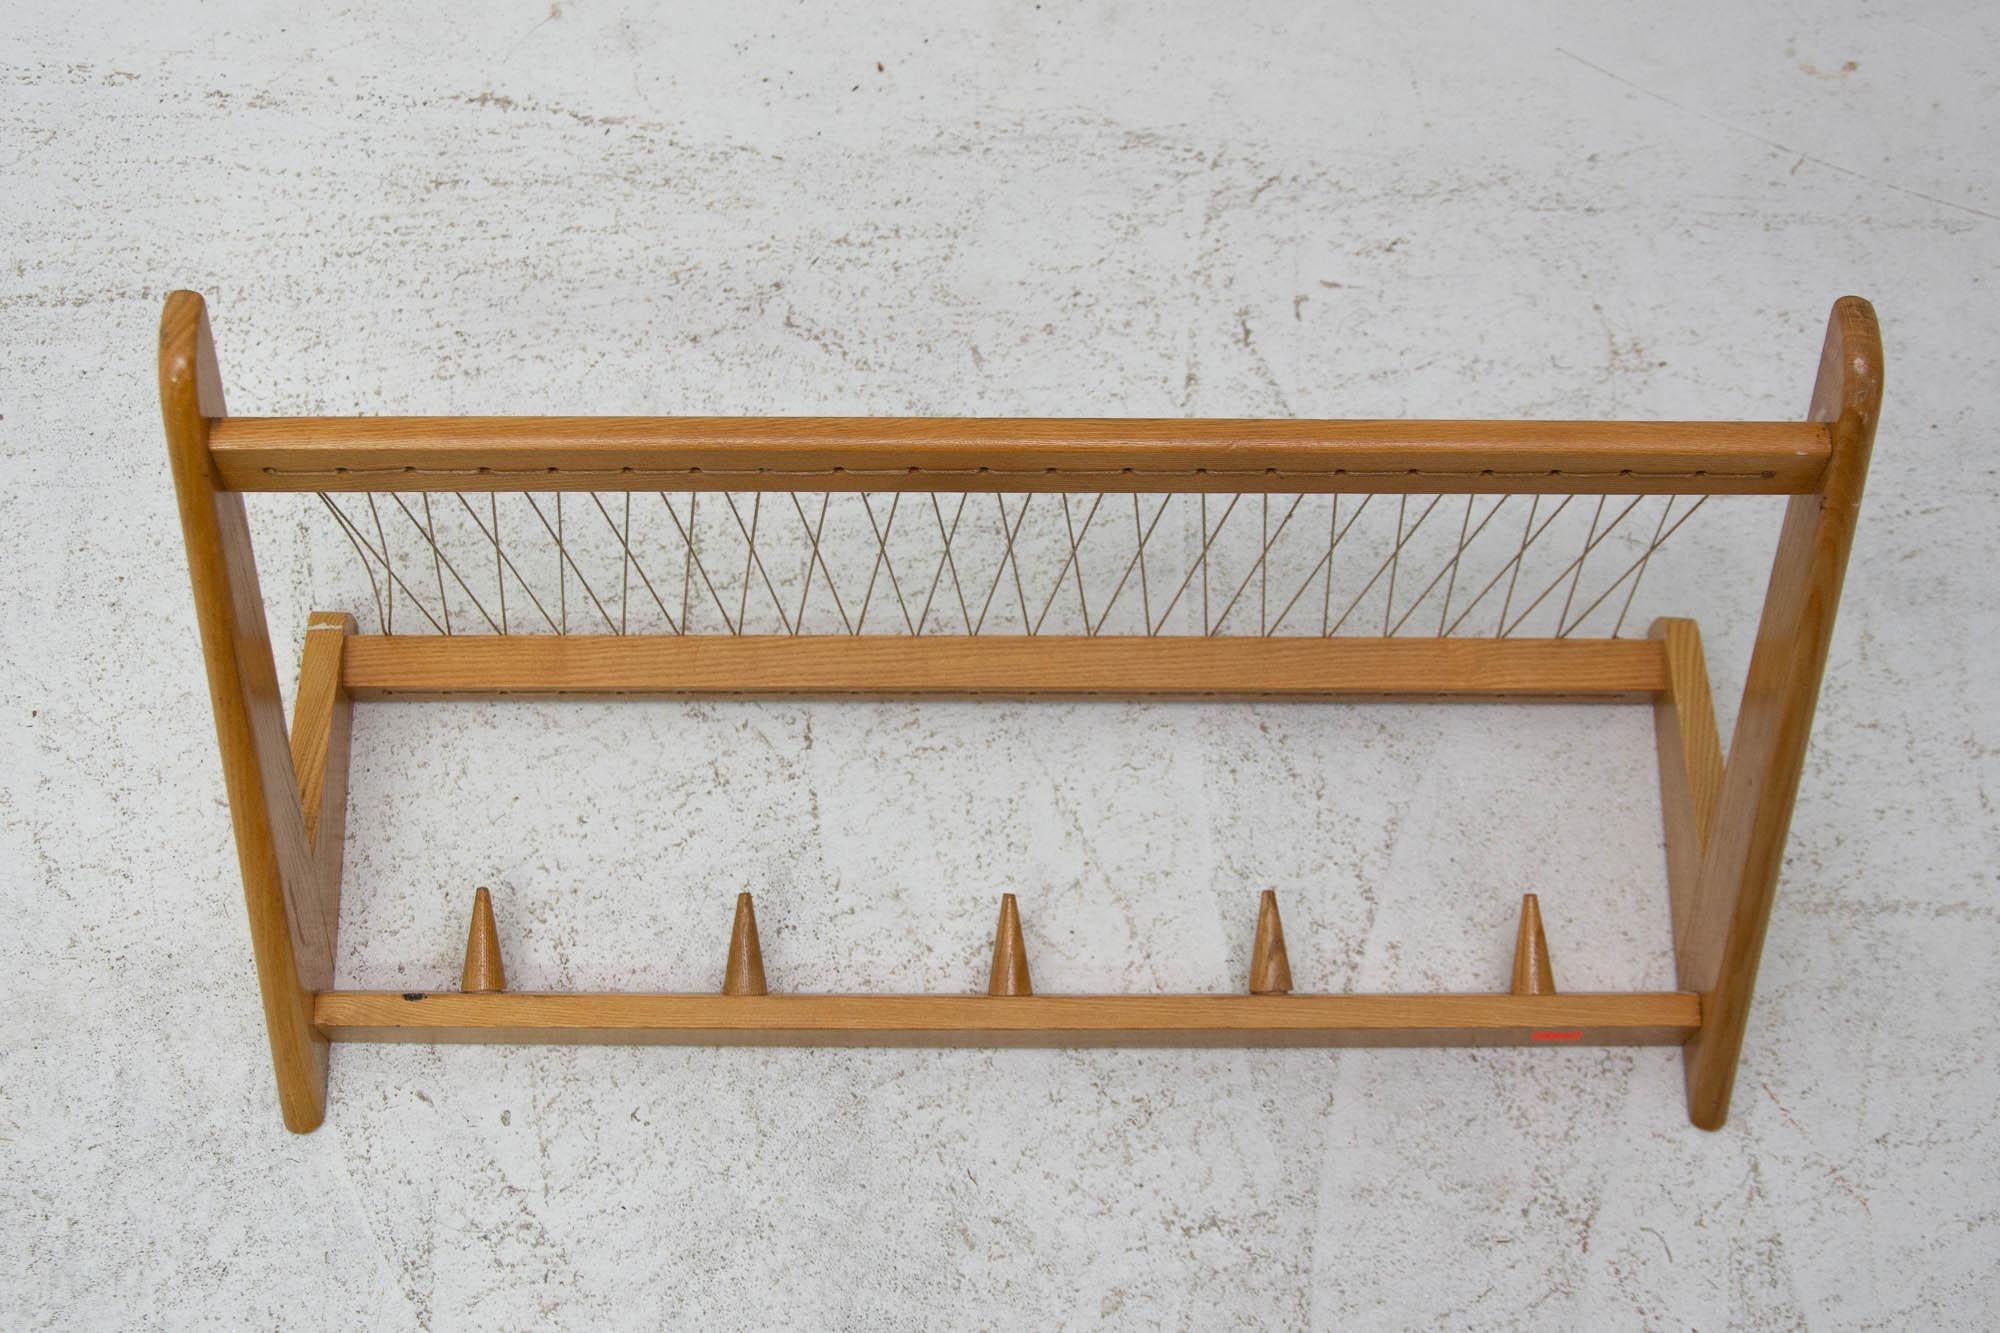 Vintage wall shelf, made in the former Czechoslovakia in the 1960s. It was produced by Krásná Jizba company. It’s made of beech wood and an intertwined upper part. In very good Vintage condition.